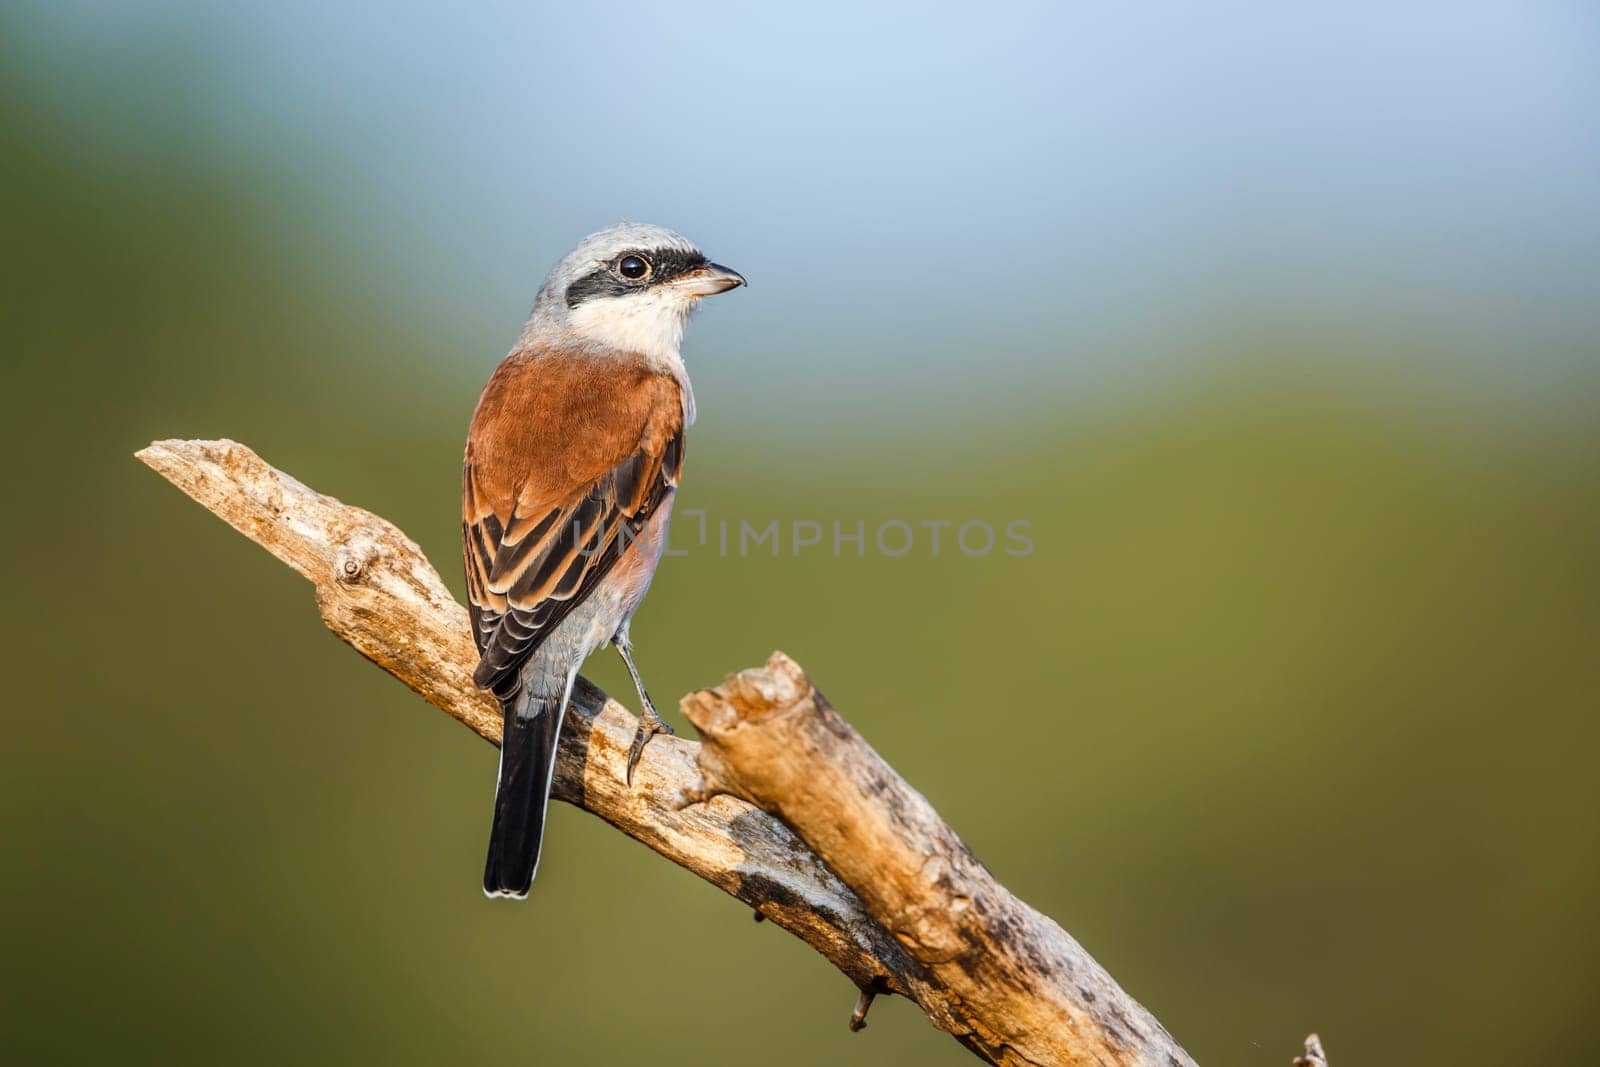 Red-backed Shrike standing on a branch rear view isolated in natural background in Kruger National park, South Africa ; Specie Lanius collurio family of Laniidae